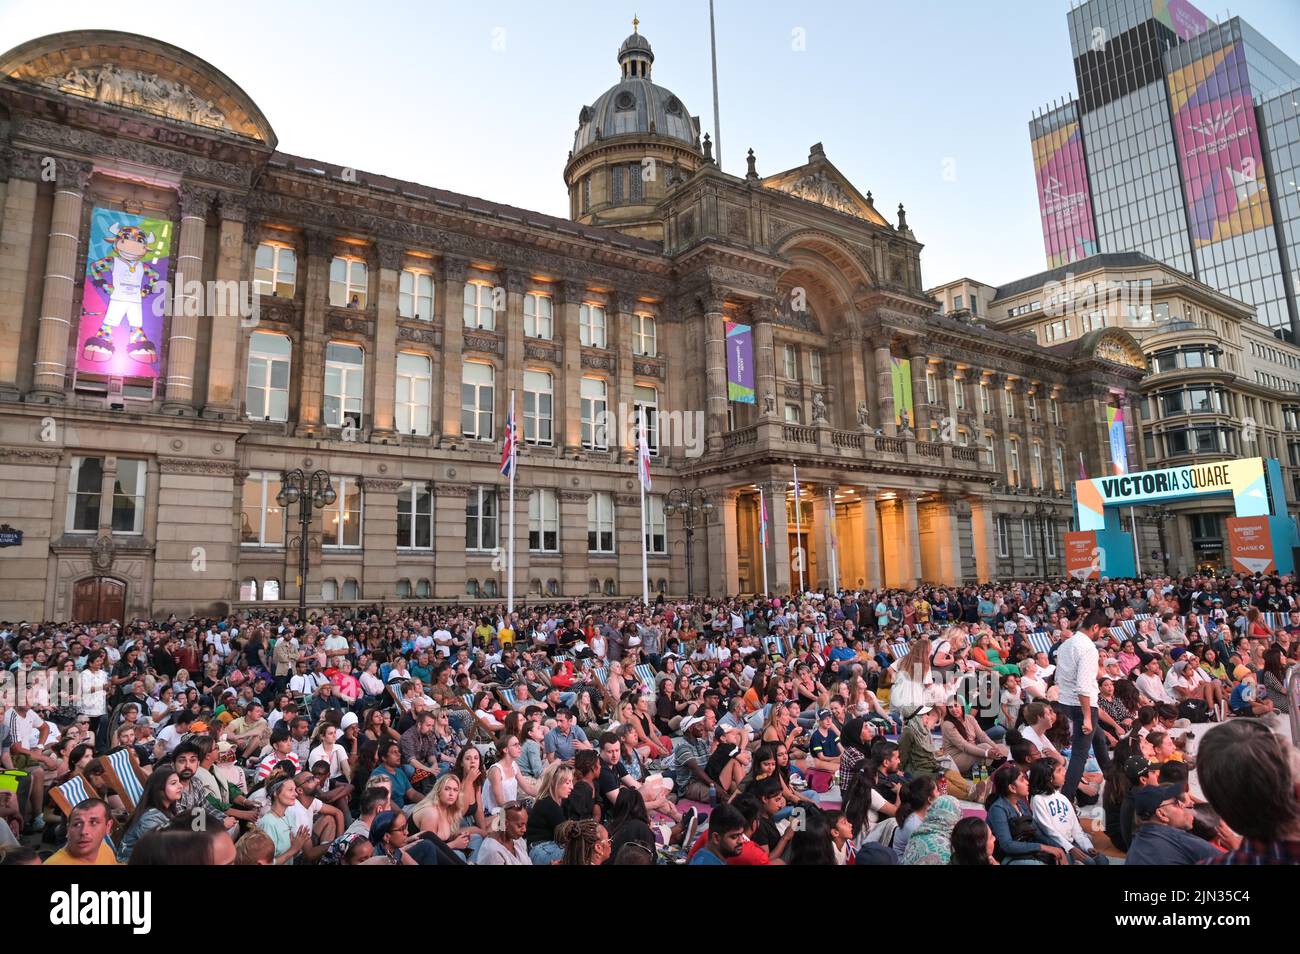 Victoria Square, Birmingham, England, August 8th 2022. - Thousands of spectators pack Victoria Square in Birmingham surrounded by the Council House and Town Hall to watch the closing ceremony of the 2022 Commonwealth Games. Pic by Credit: Michael Scott/Alamy Live News Stock Photo